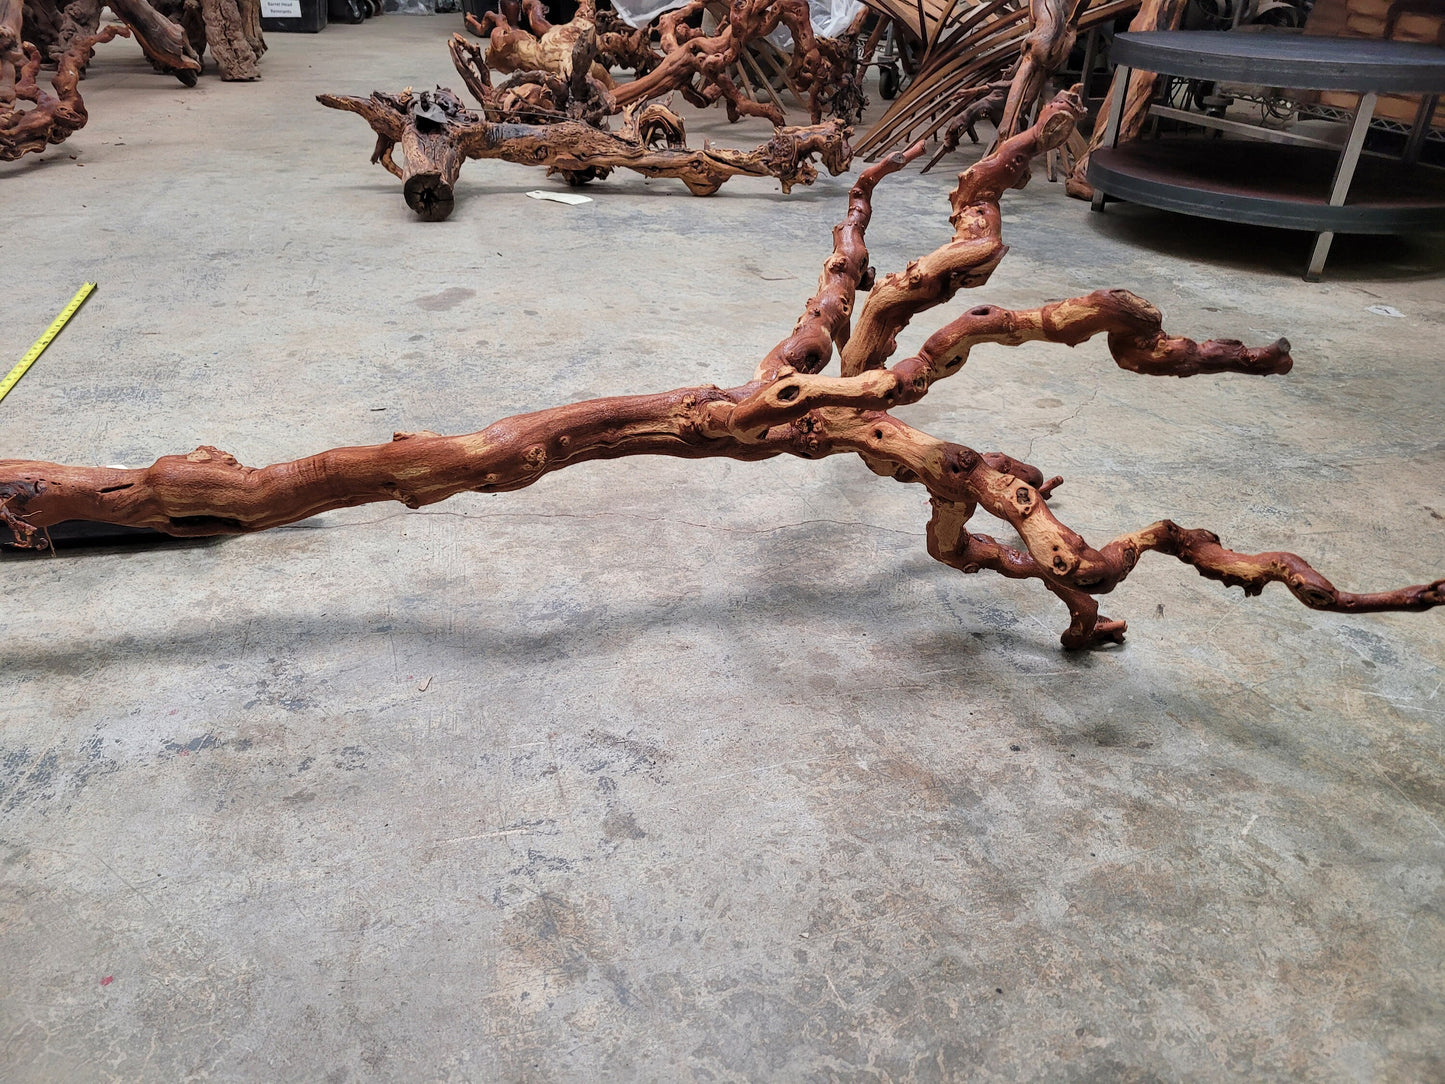 Old Vine Zinfandel Grapevine Art From Turley Winery 100% Reclaimed + Ready to Ship!! 030822-6